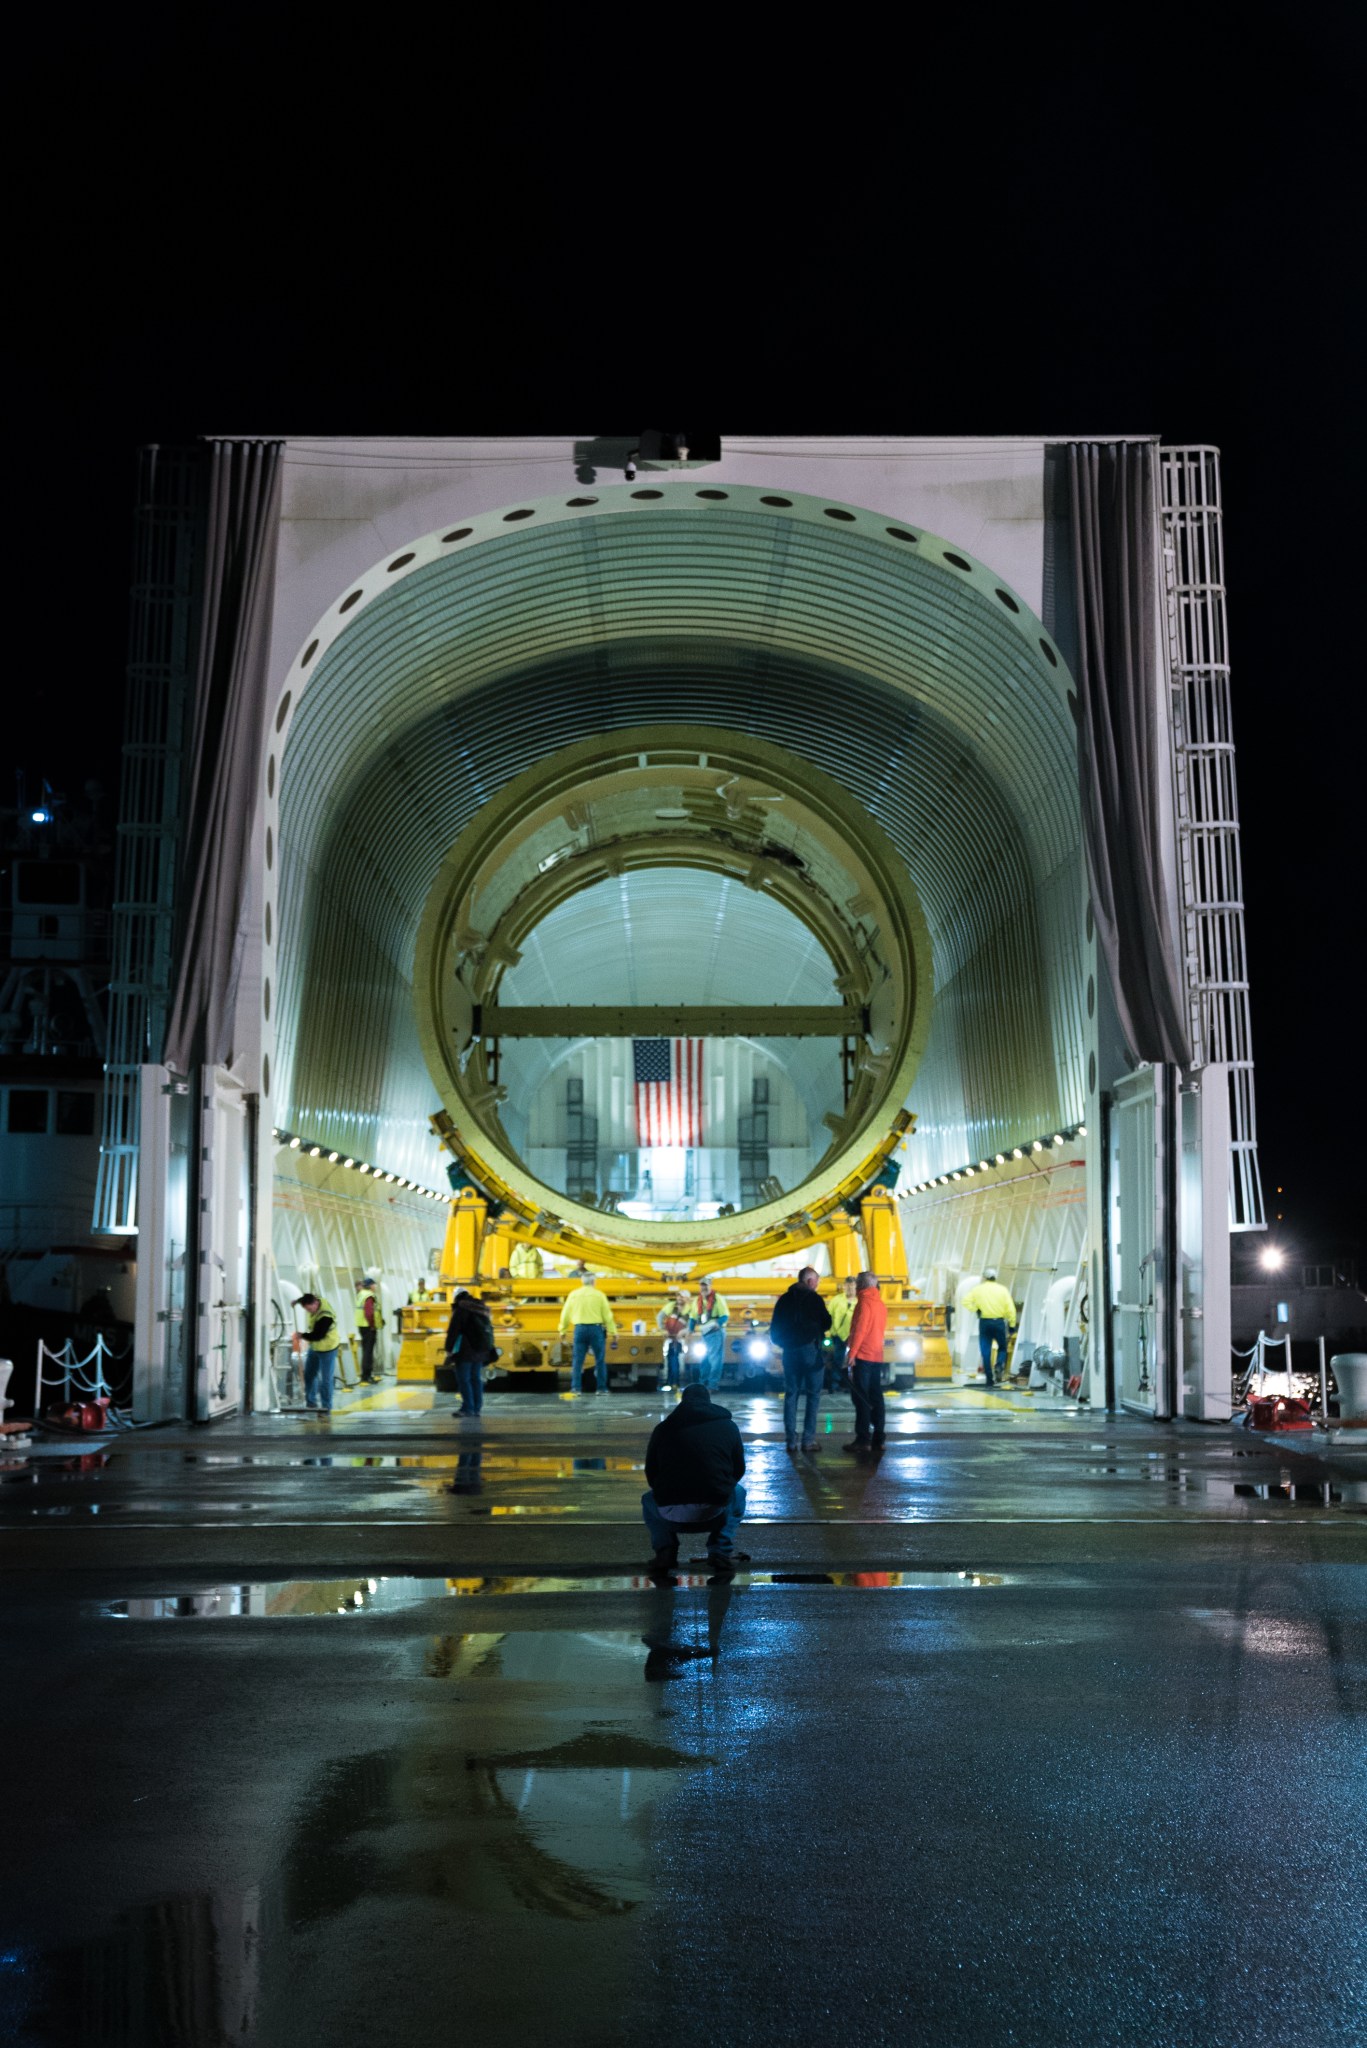 A structural test version of the intertank for NASA's new deep-space rocket